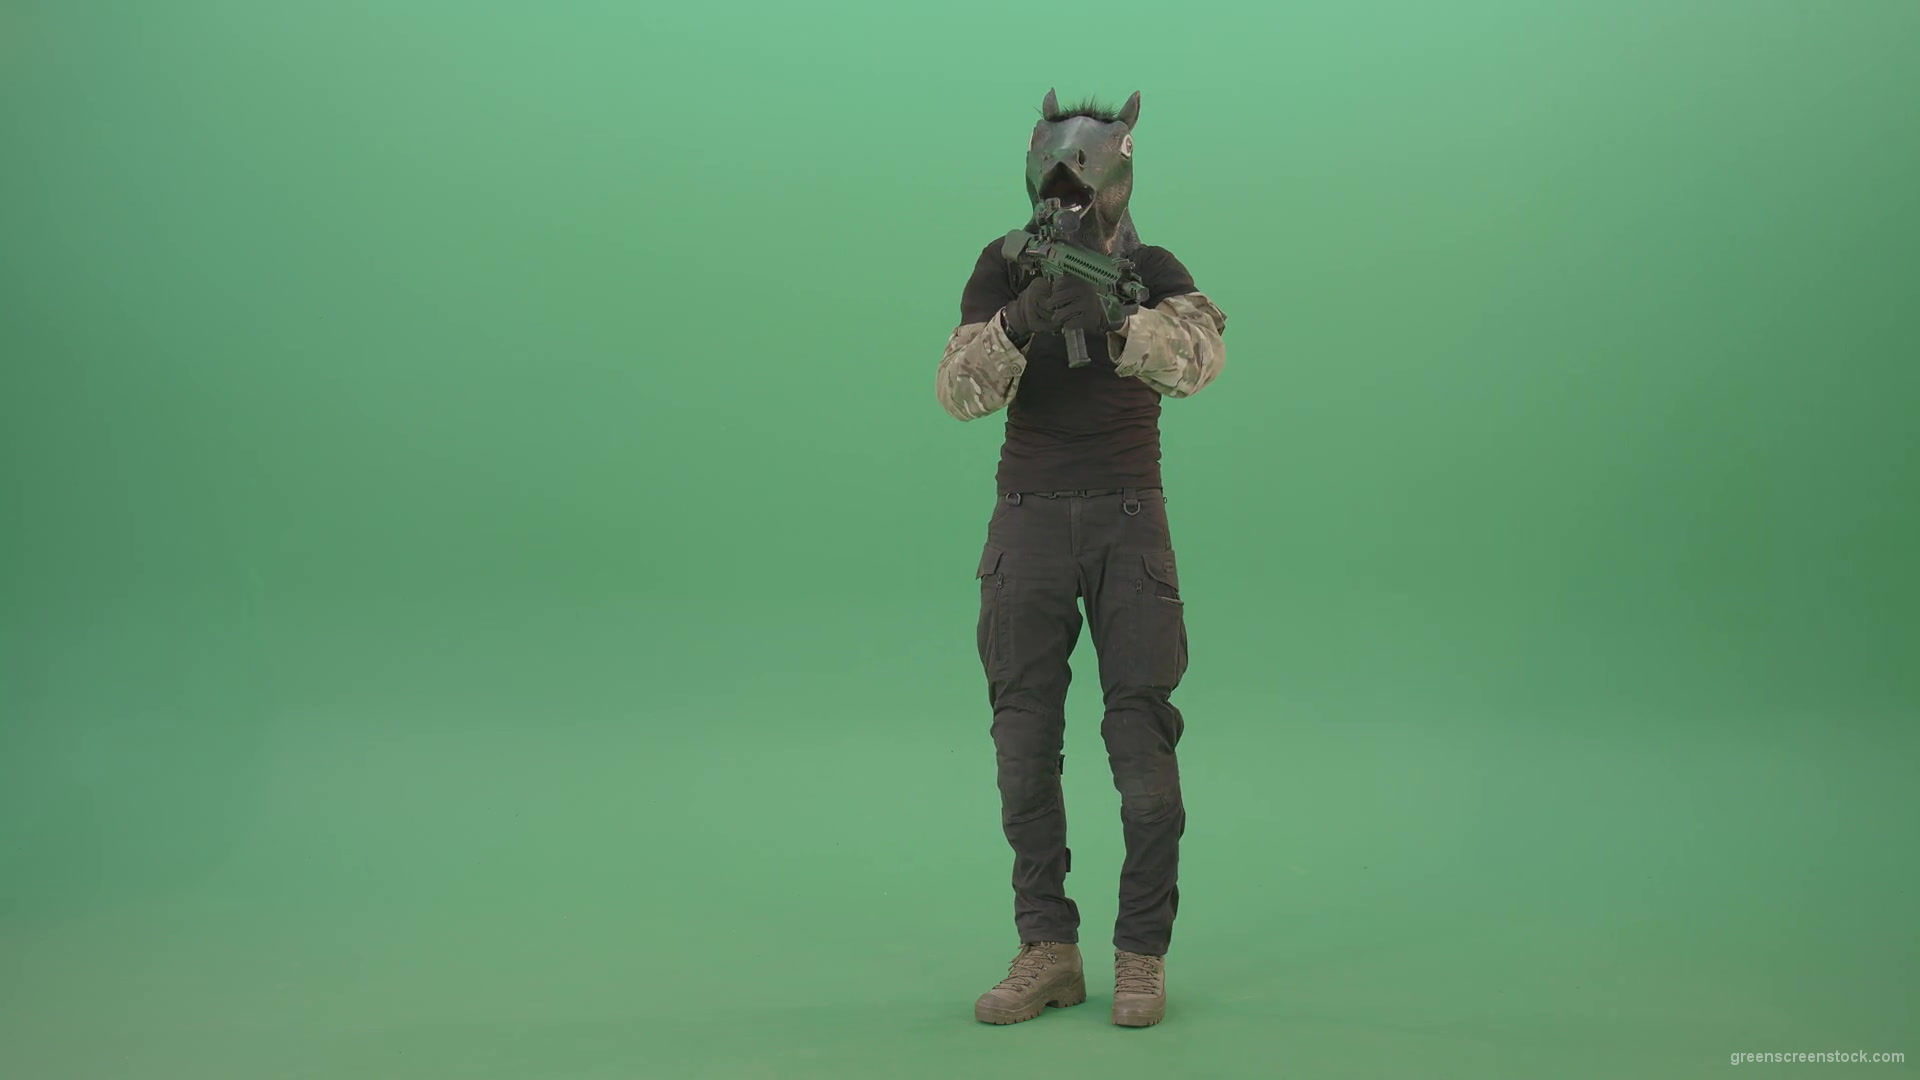 Funny-Army-Horse-Man-shooting-animals-on-Green-Screen-from-Machine-Gun-4K-Video-Footage-1920_006 Green Screen Stock